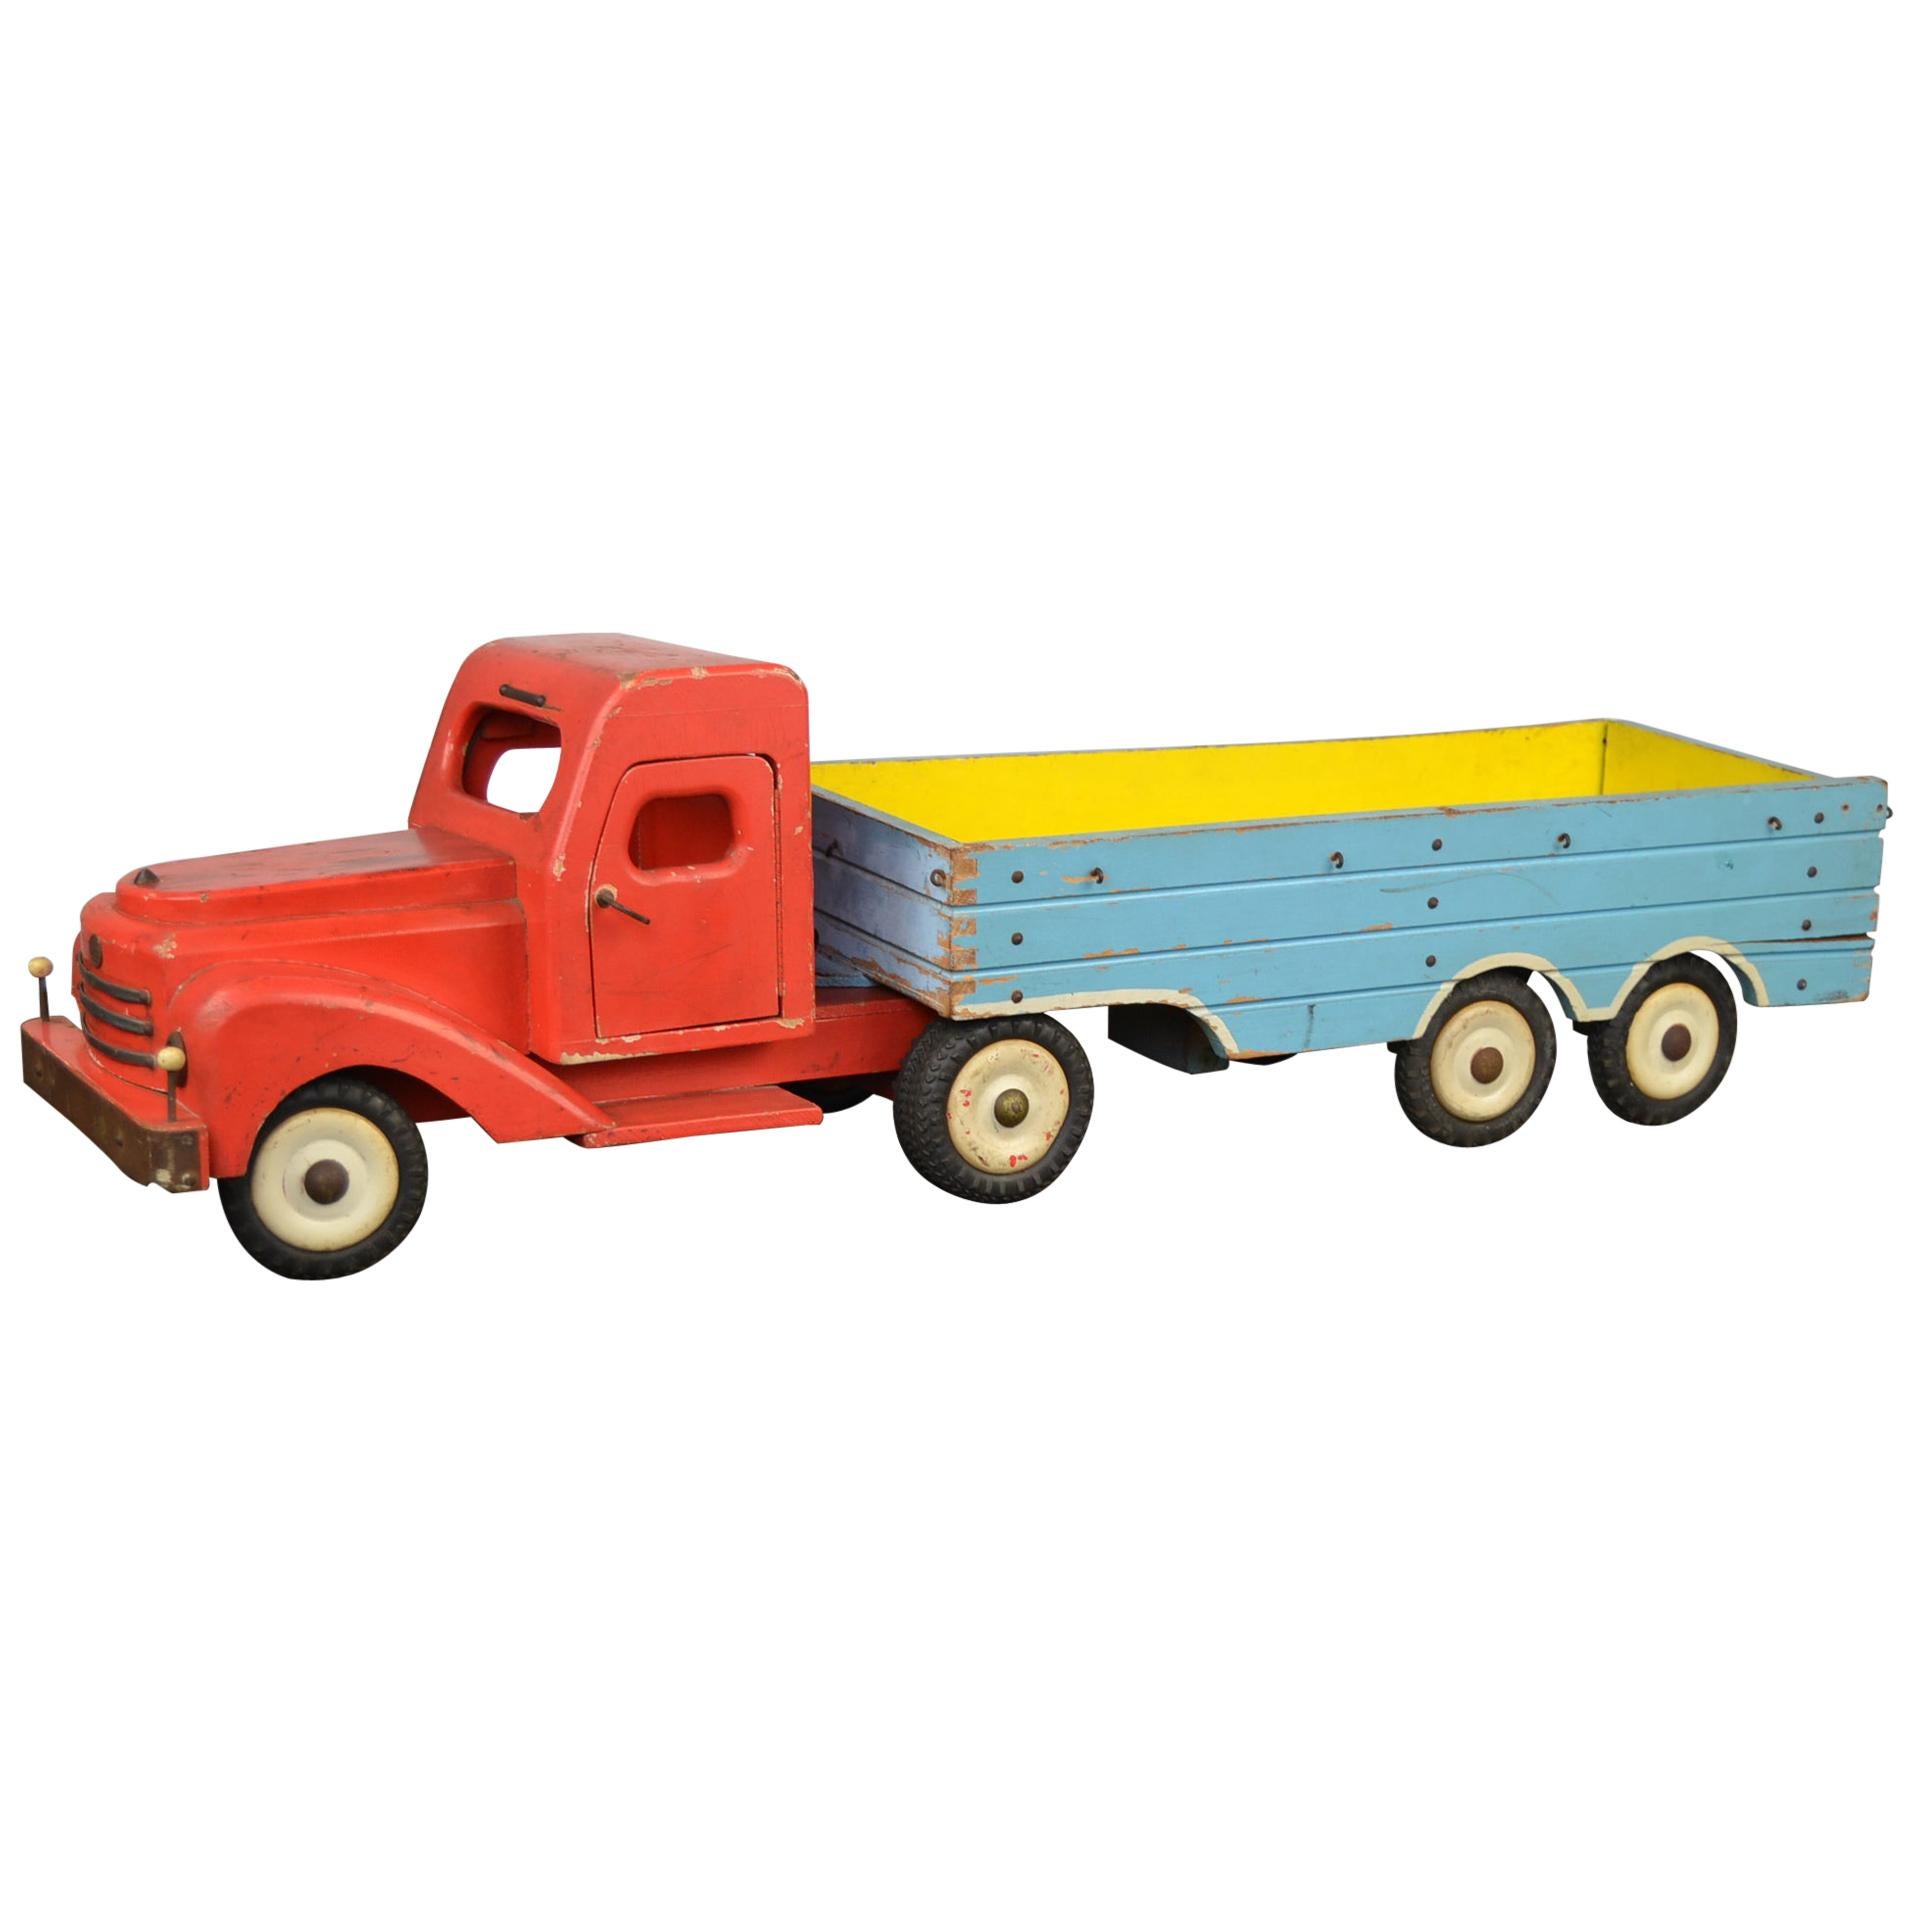 Large Wooden Toy Truck with Trailer by Bigge, Germany